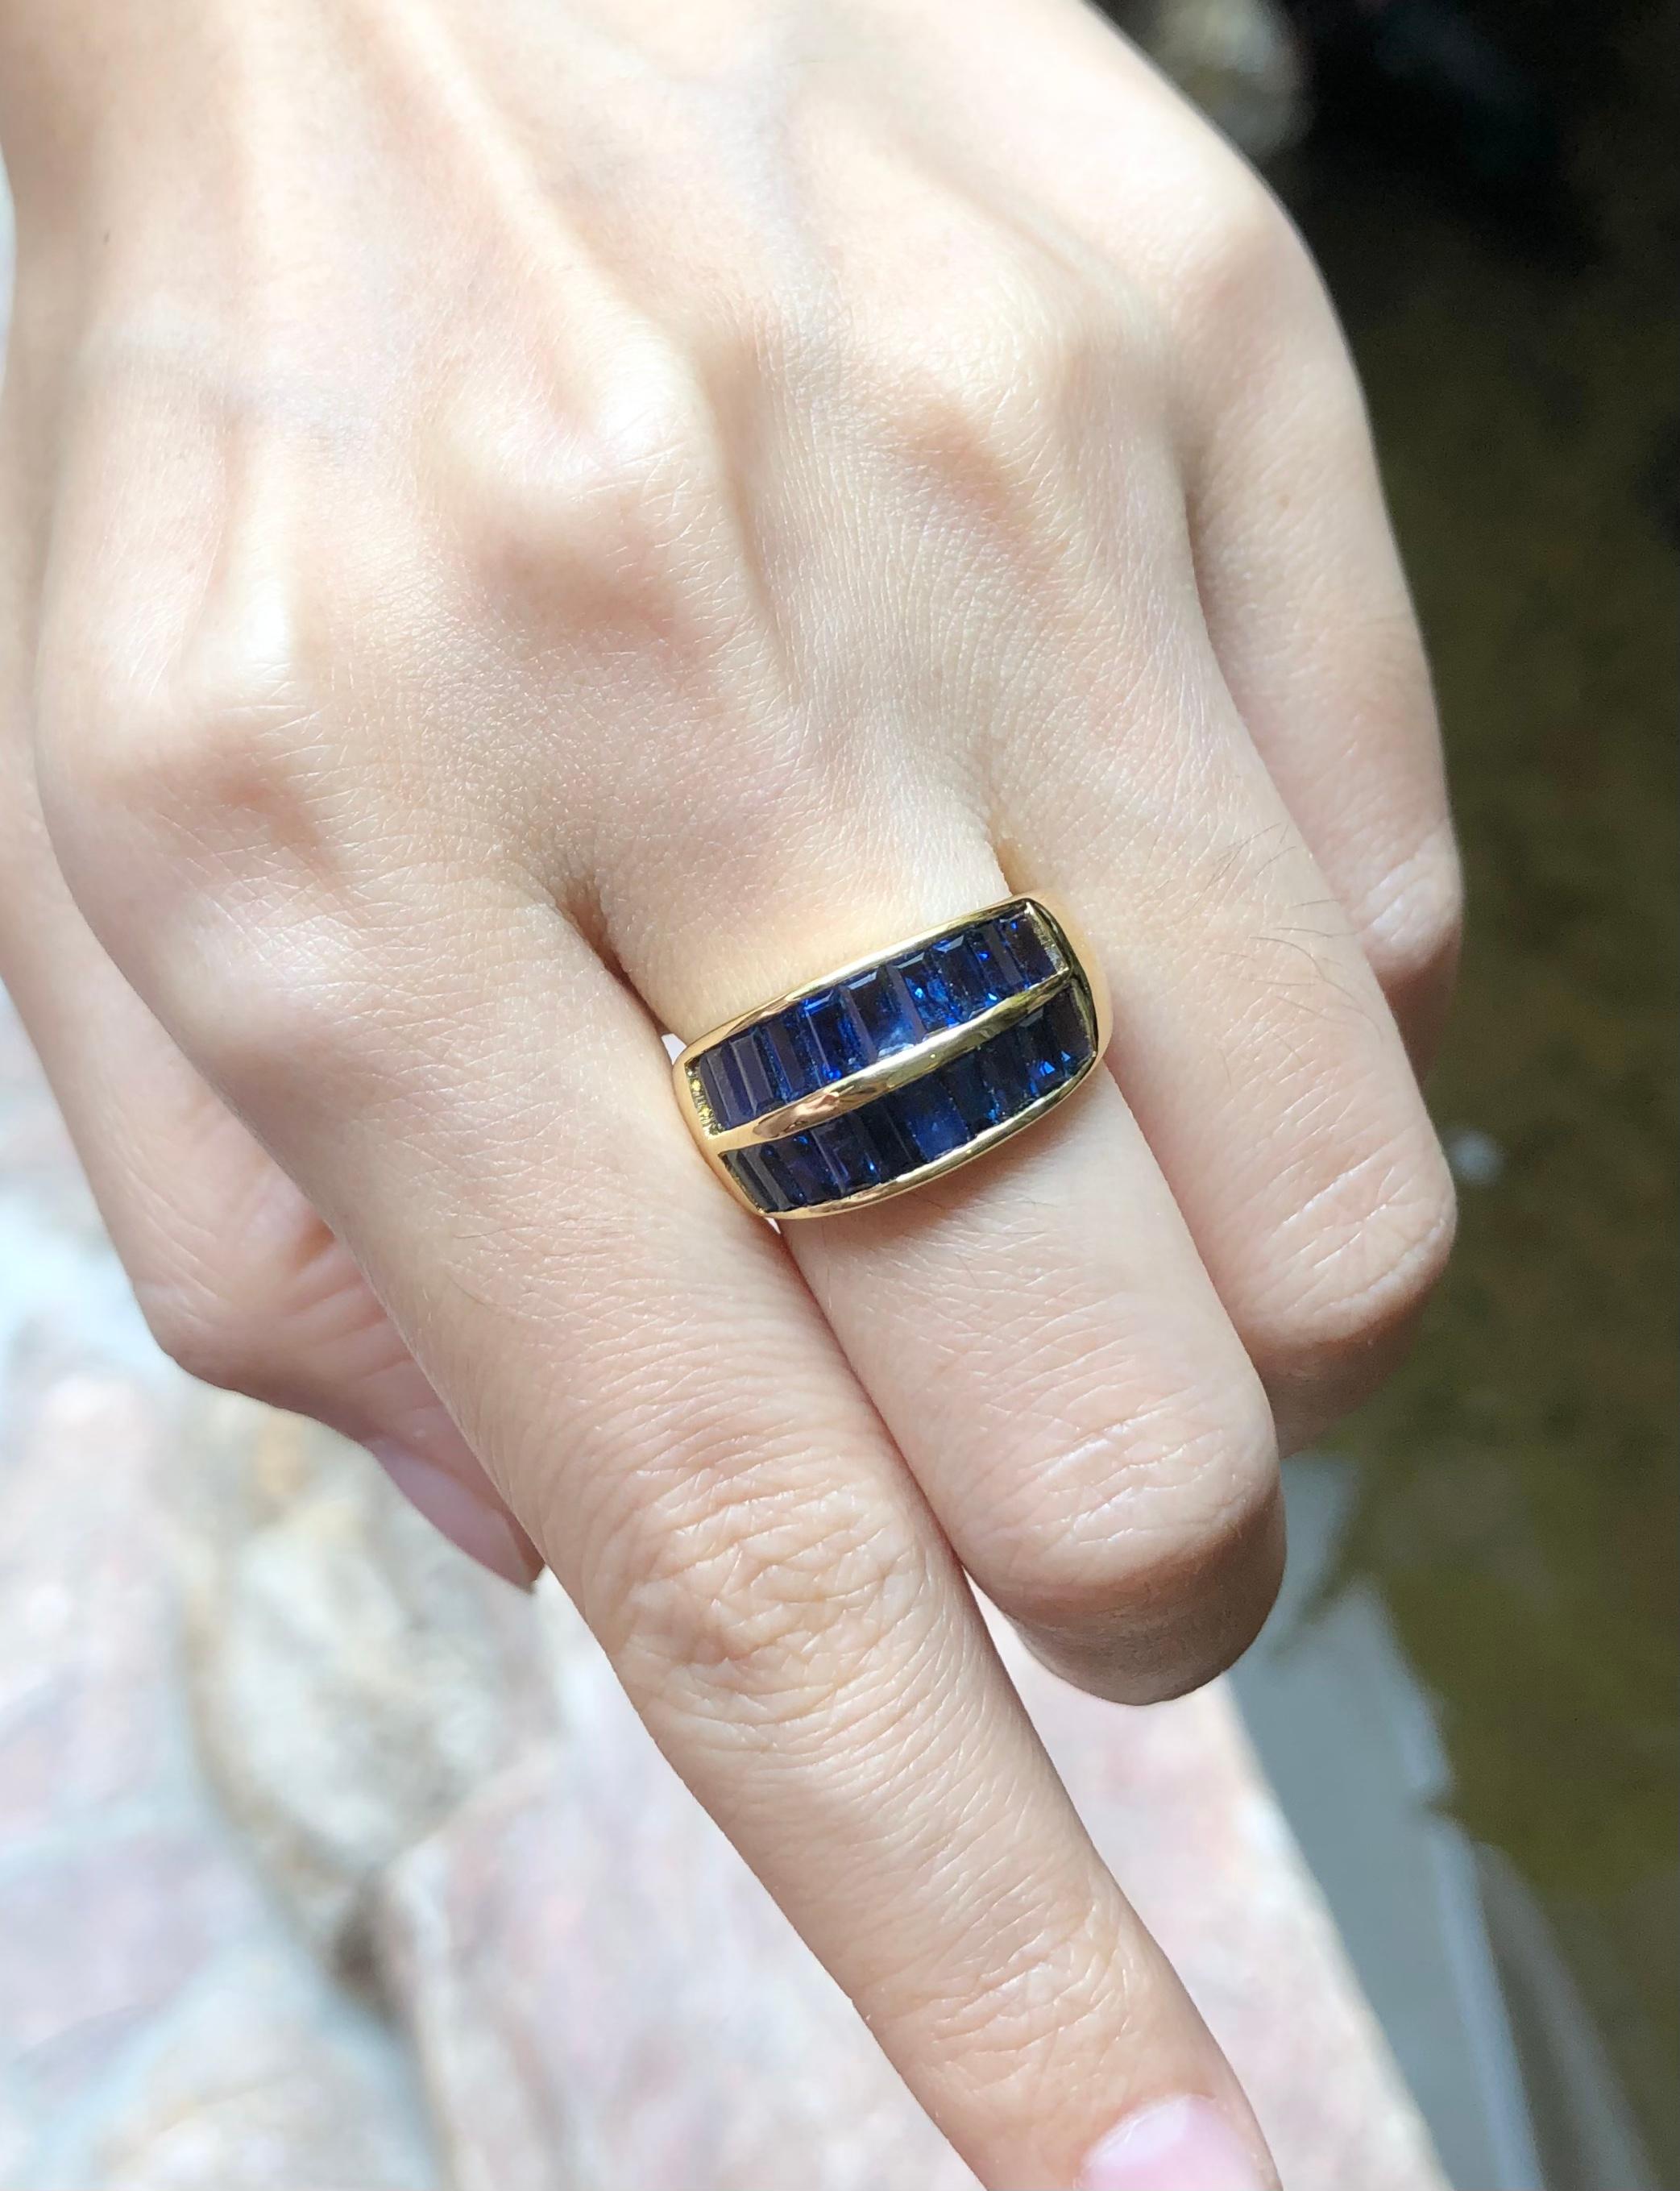 Blue Sapphire 4.48 carats Ring set in 18 Karat Gold Settings

Width:  1.8 cm 
Length: 1.0 cm
Ring Size: 55
Total Weight: 7.15 grams

